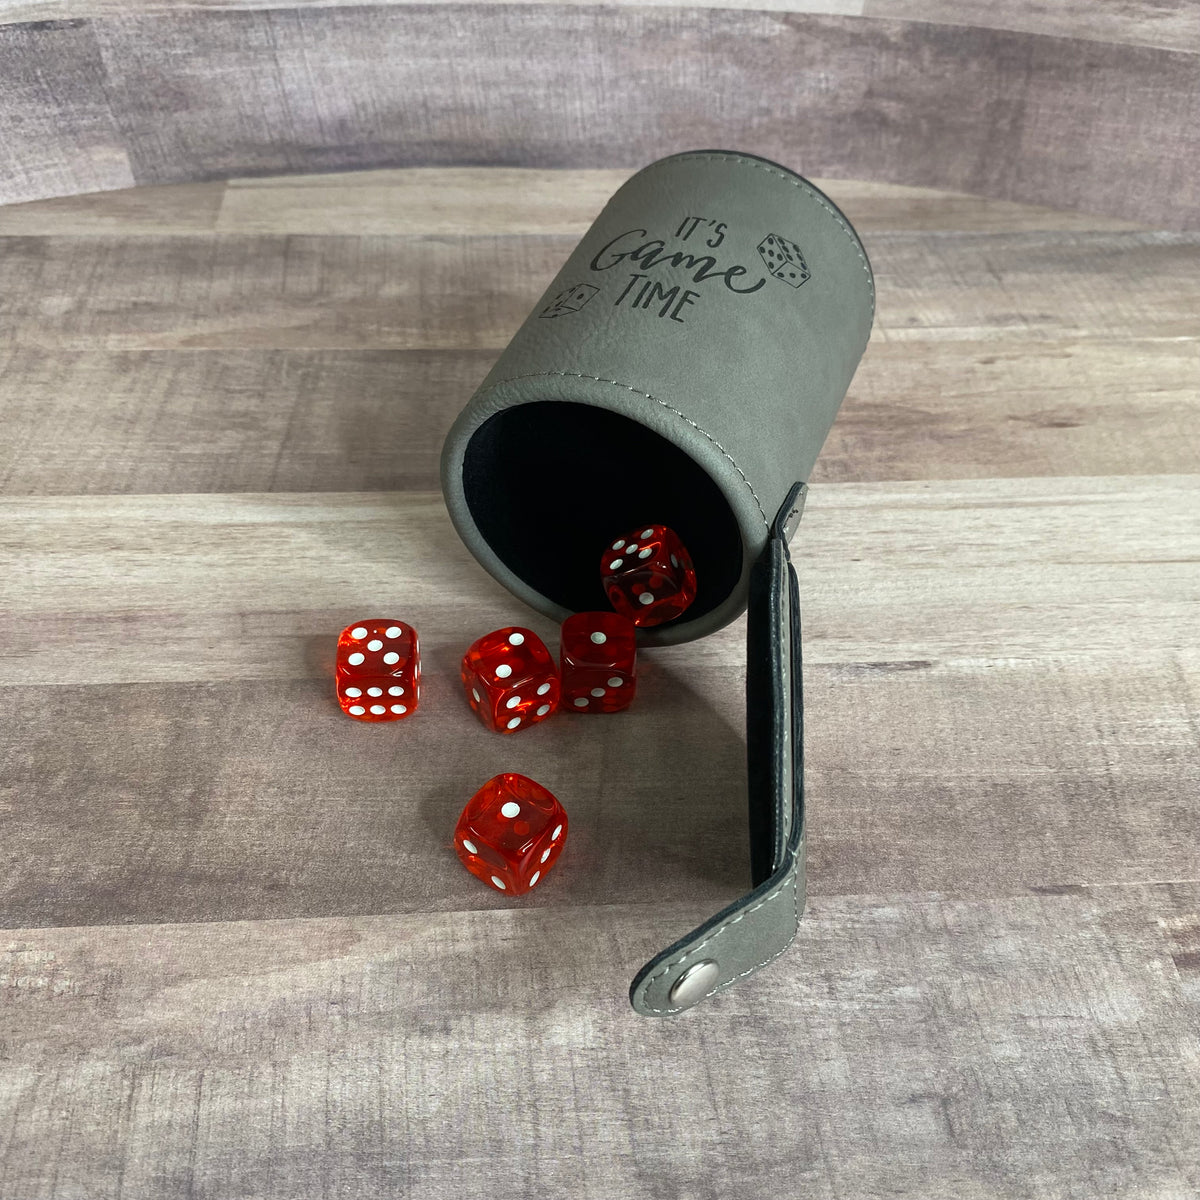 gray dice cup on side showing dice storage in the bottom